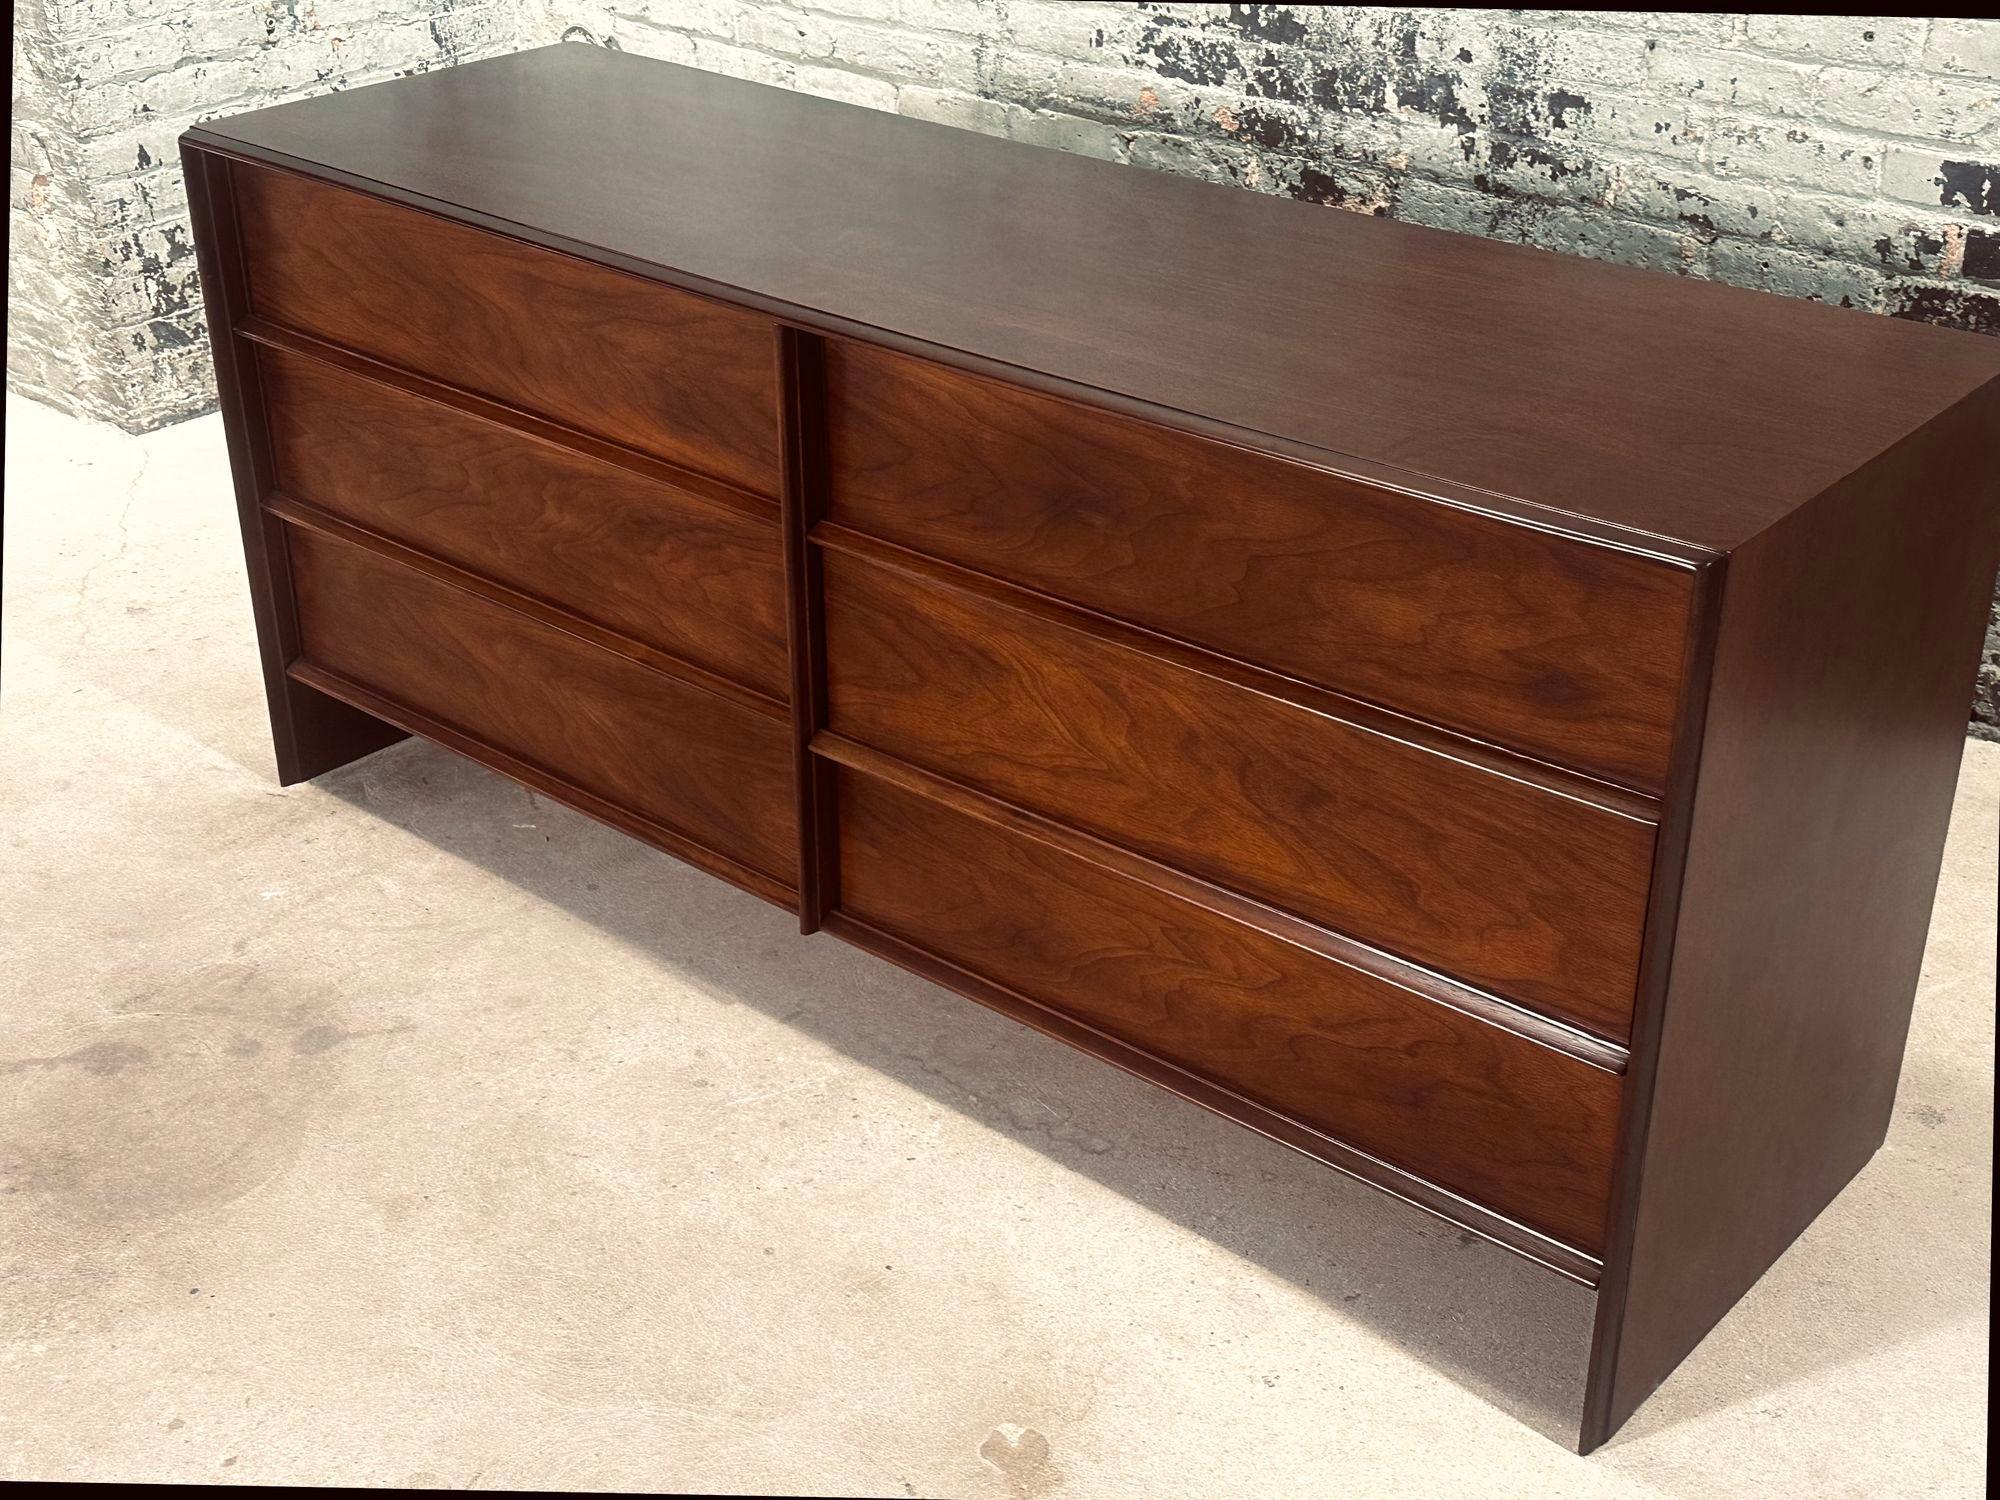 T.H. Robsjohn-Gibbings Walnut 6 Drawer Dresser by Widdicomb, 1960 In Excellent Condition For Sale In Chicago, IL